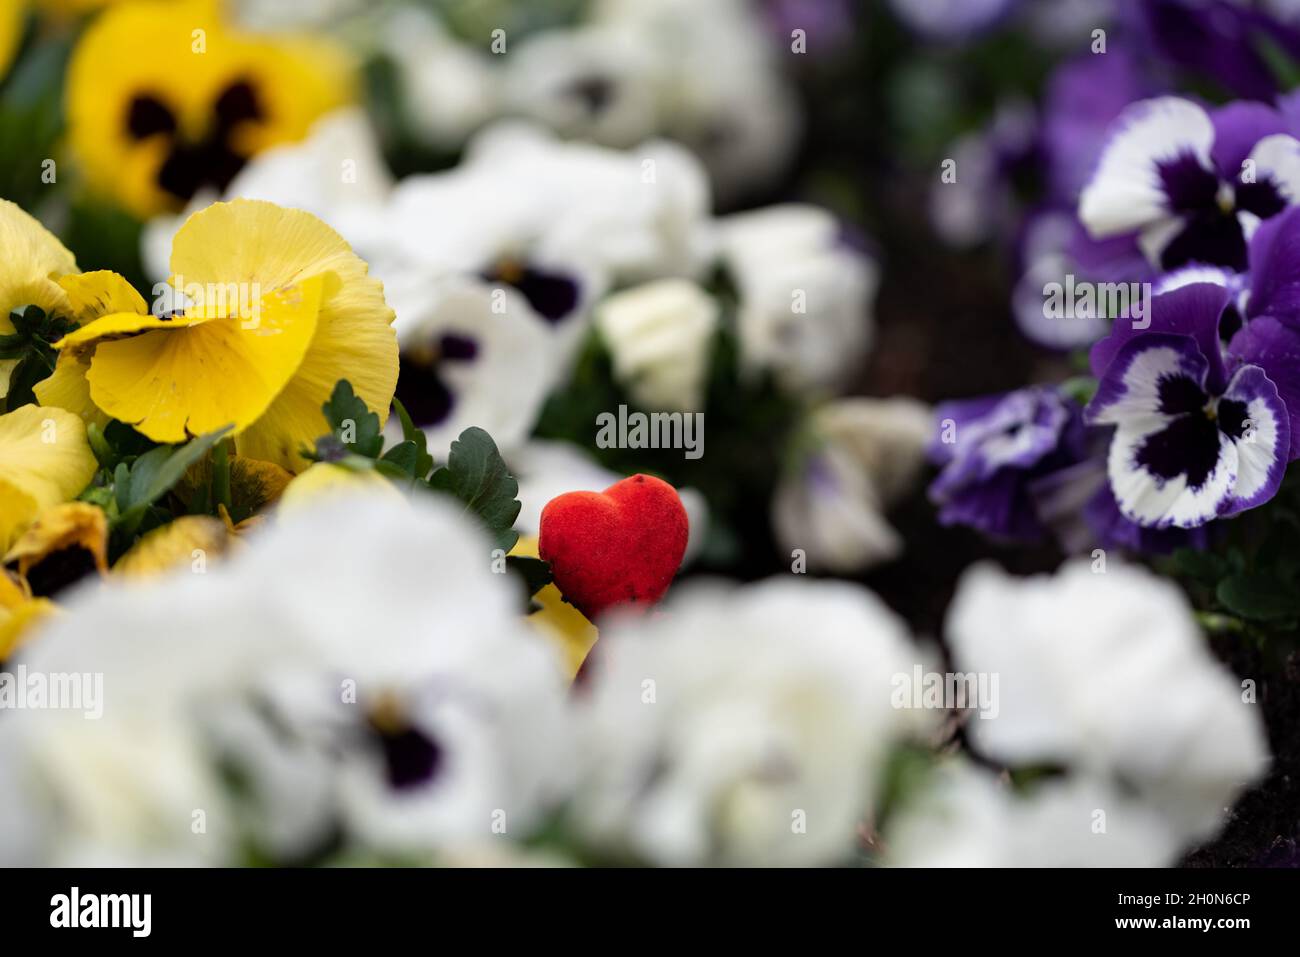 Pansies flowers, colorful plants on the bed. Lots of colorful flowers next to each other. Stock Photo